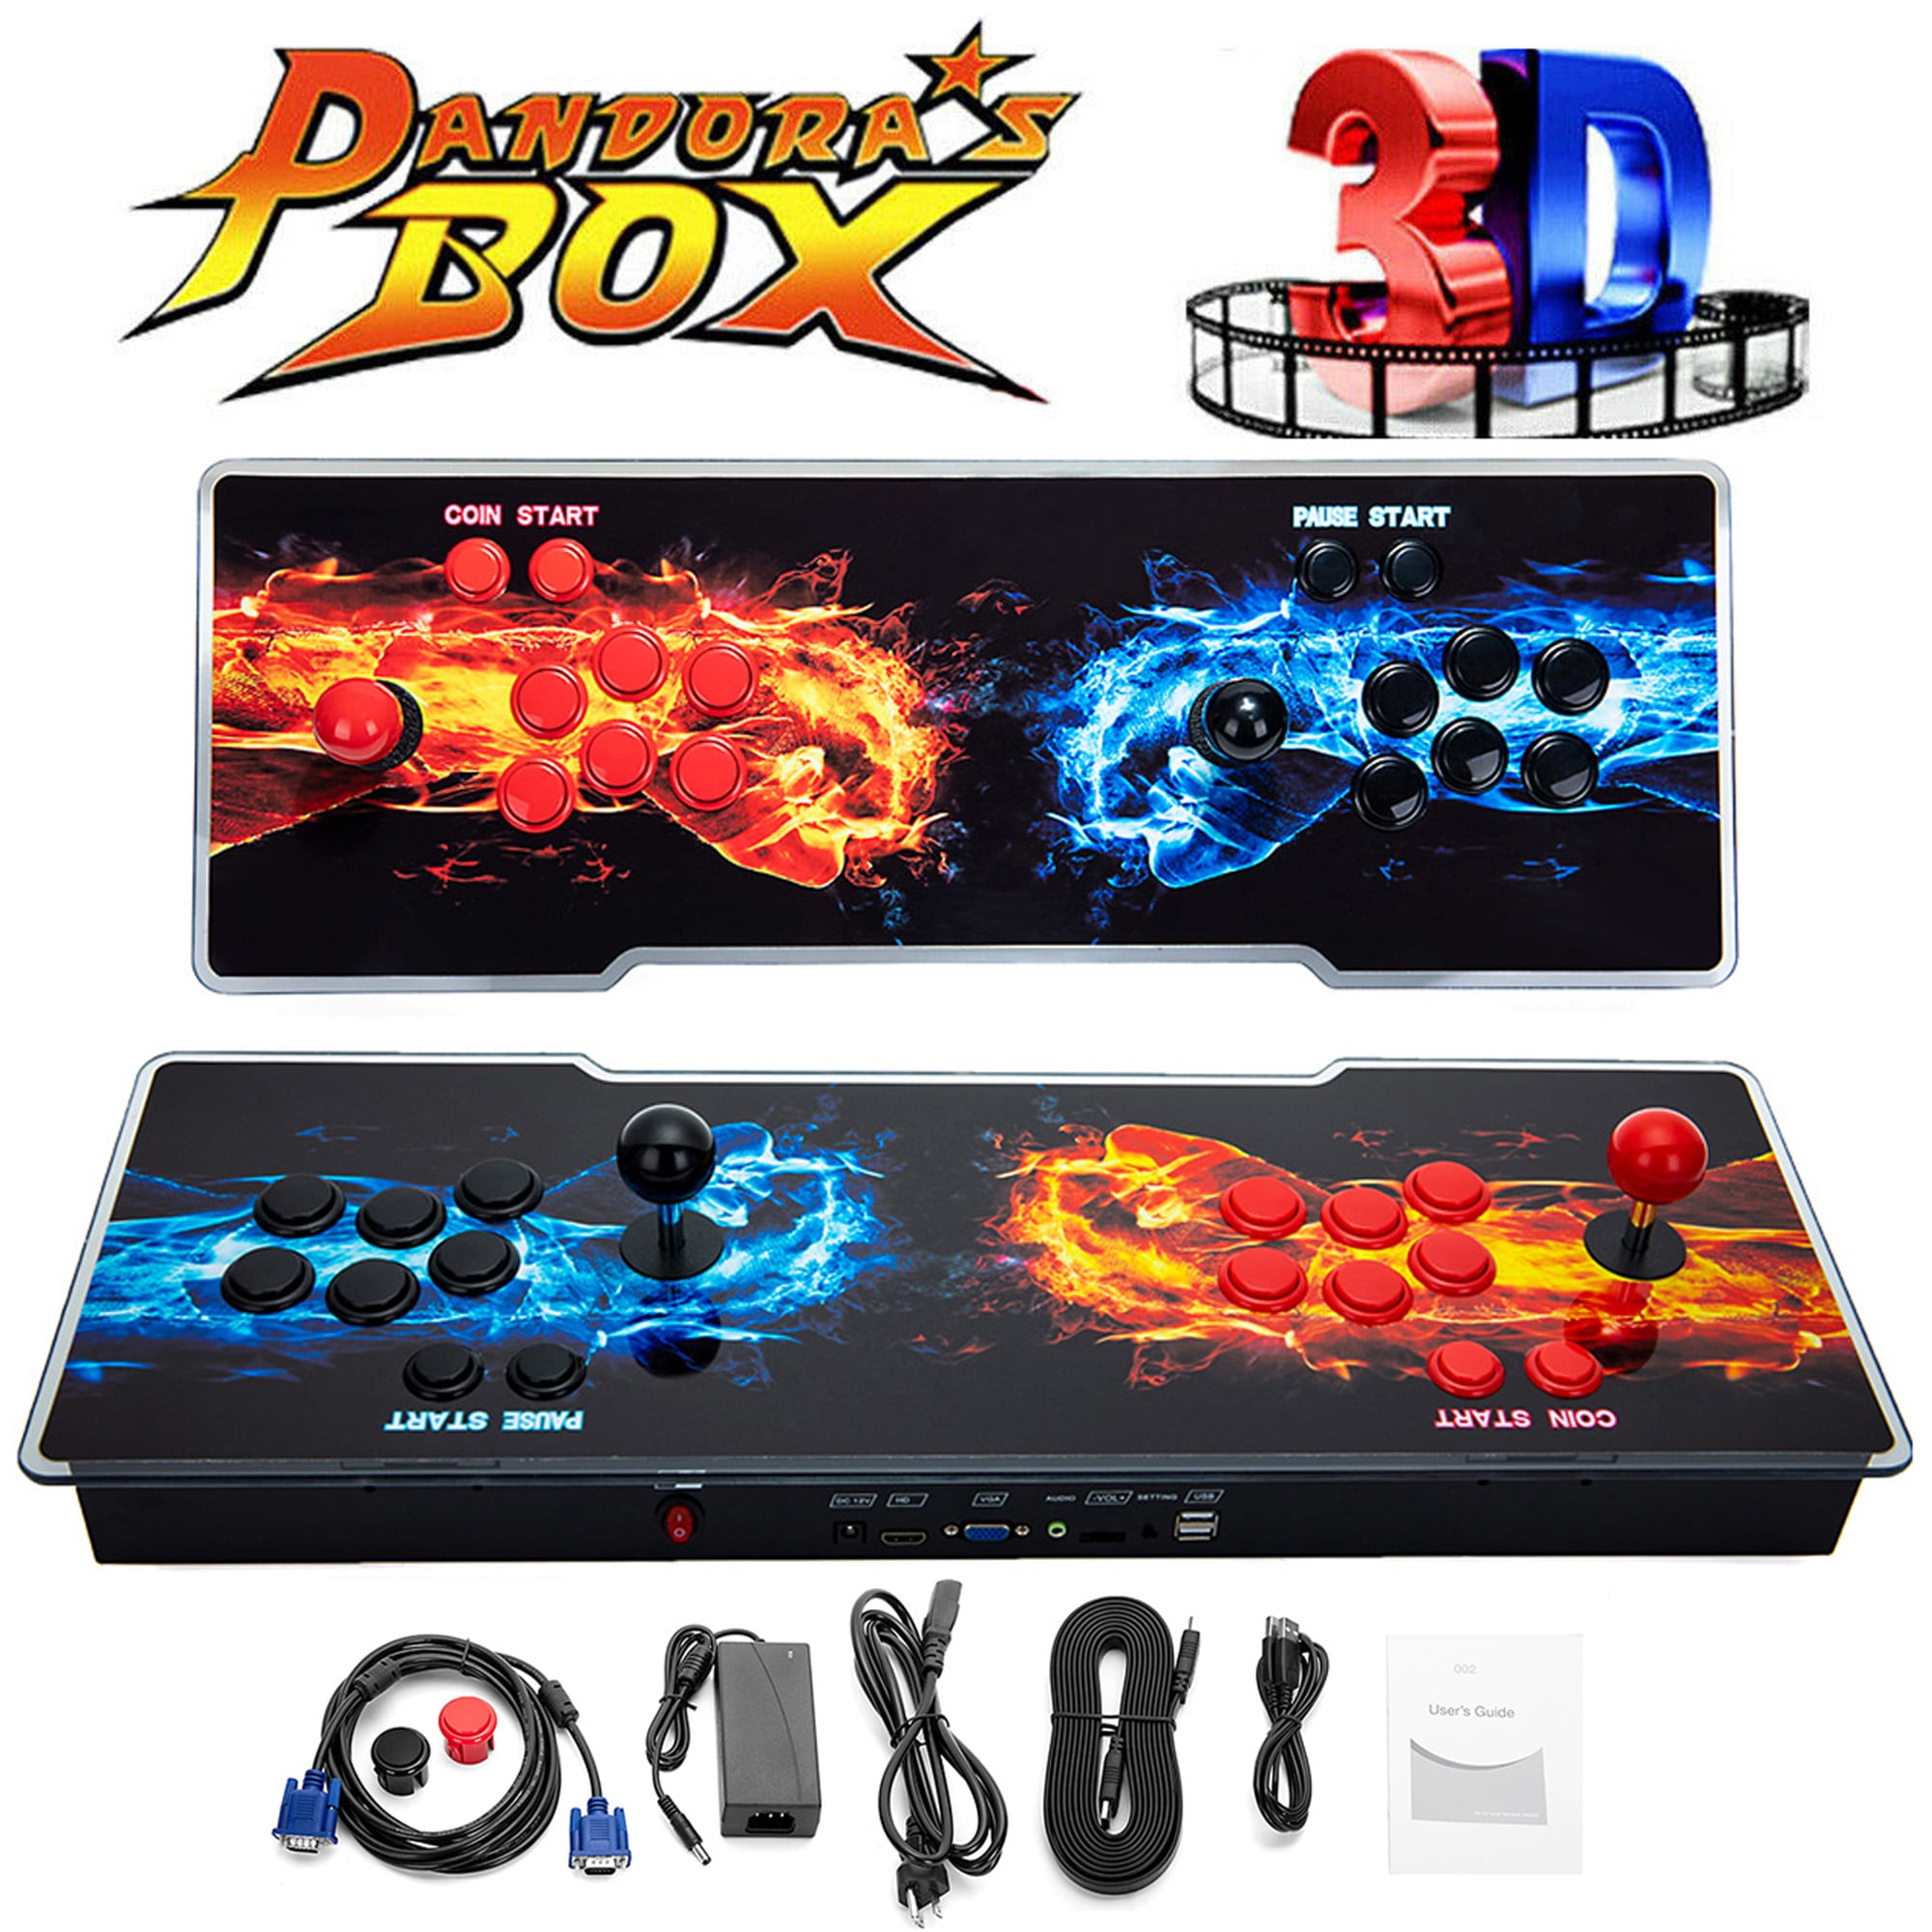  【20000 Games in 1】 Download Function 3D Pandora's Box, 3D  Arcade Game Console Support Download Add Extra Game, 3D Game, 1280x720 Full  HD, Search/ Save/Pause Game, 4 Players Online Game 